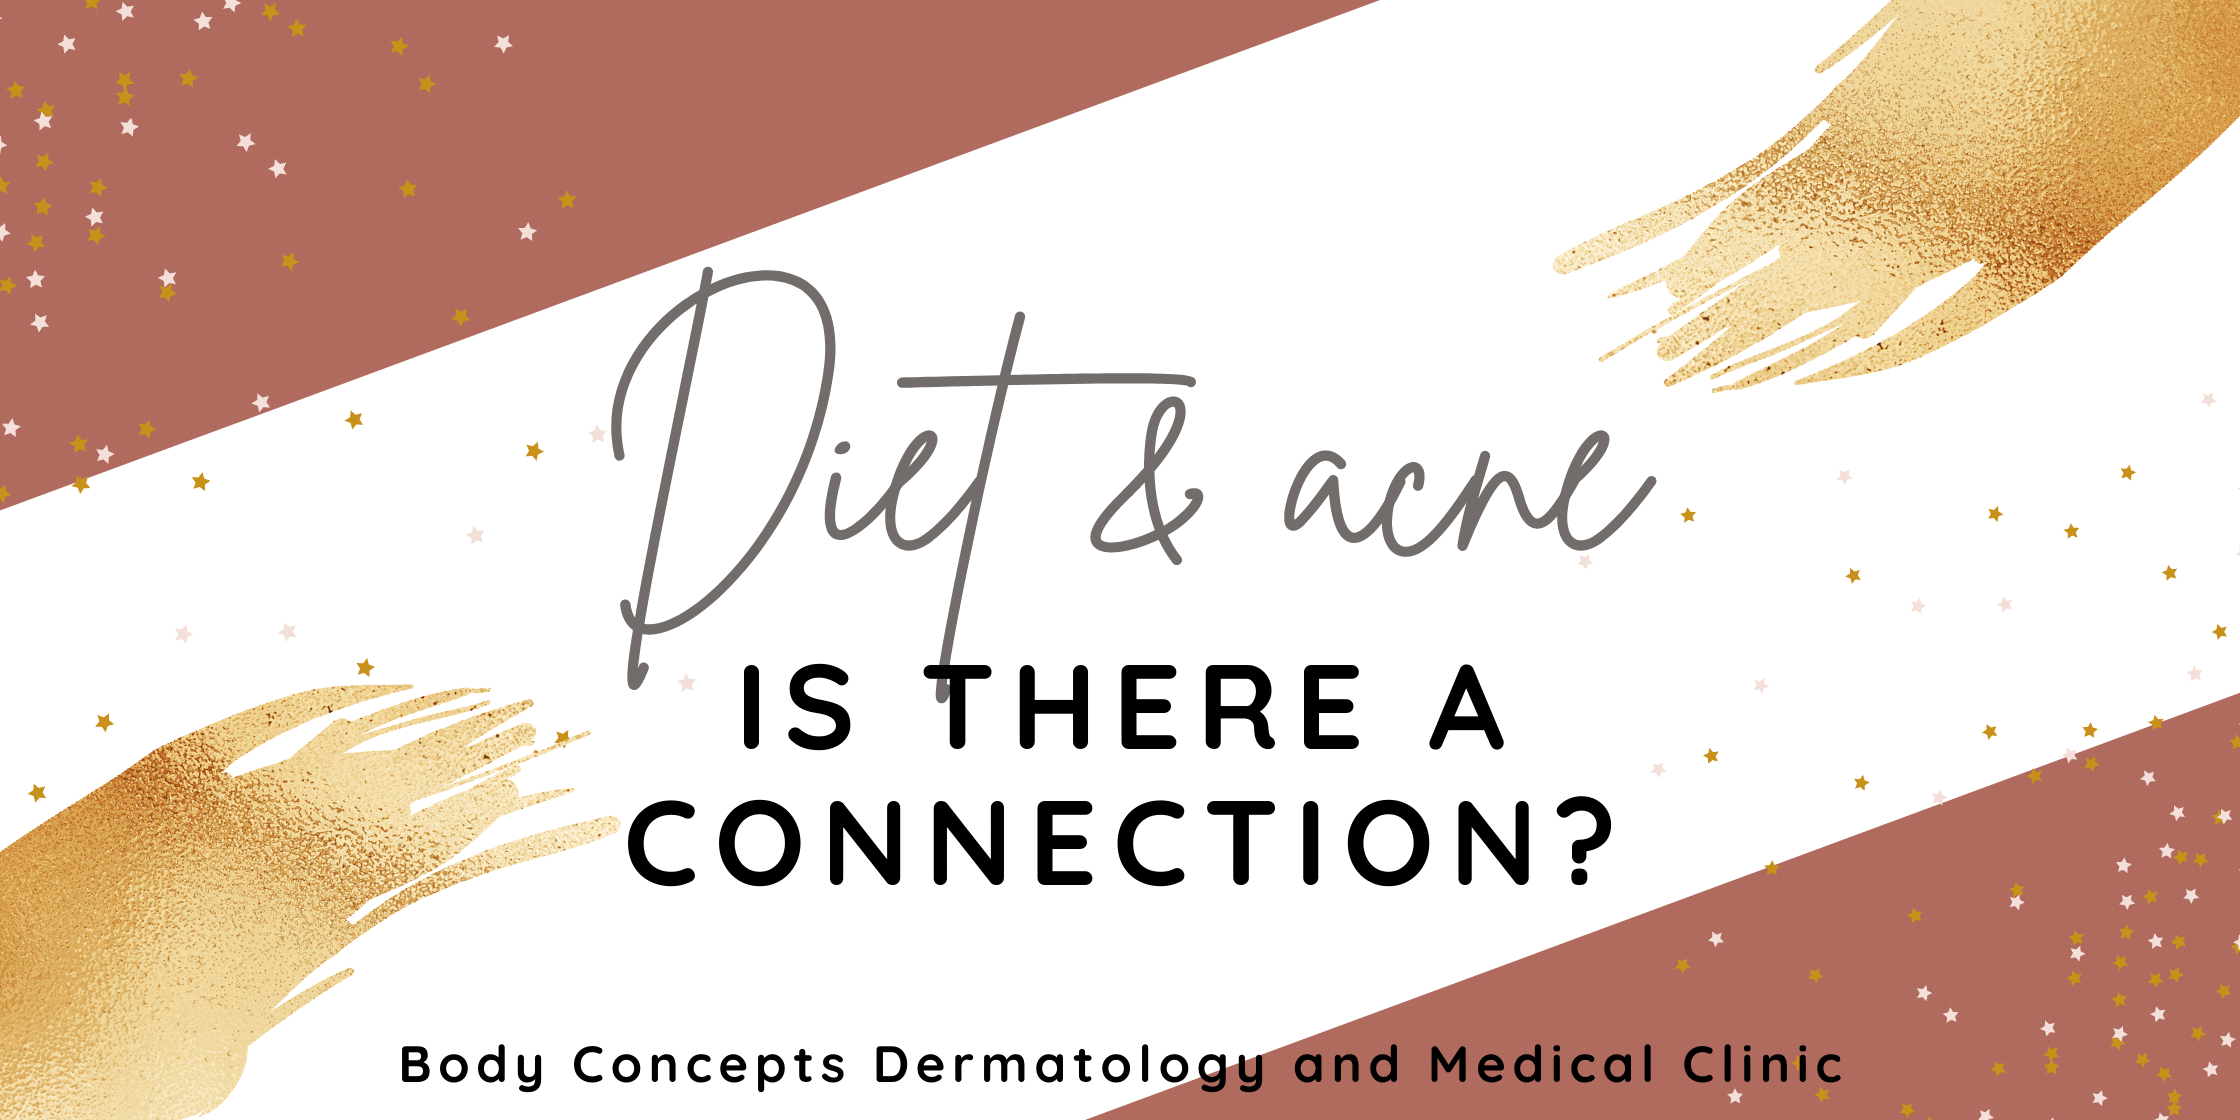 Diet and acne – is there a connection | Body Concepts Dermatology and Medical Clinic | Dr. Pag-asa Bernardo-Bagolor | San Rafael, Bulacan